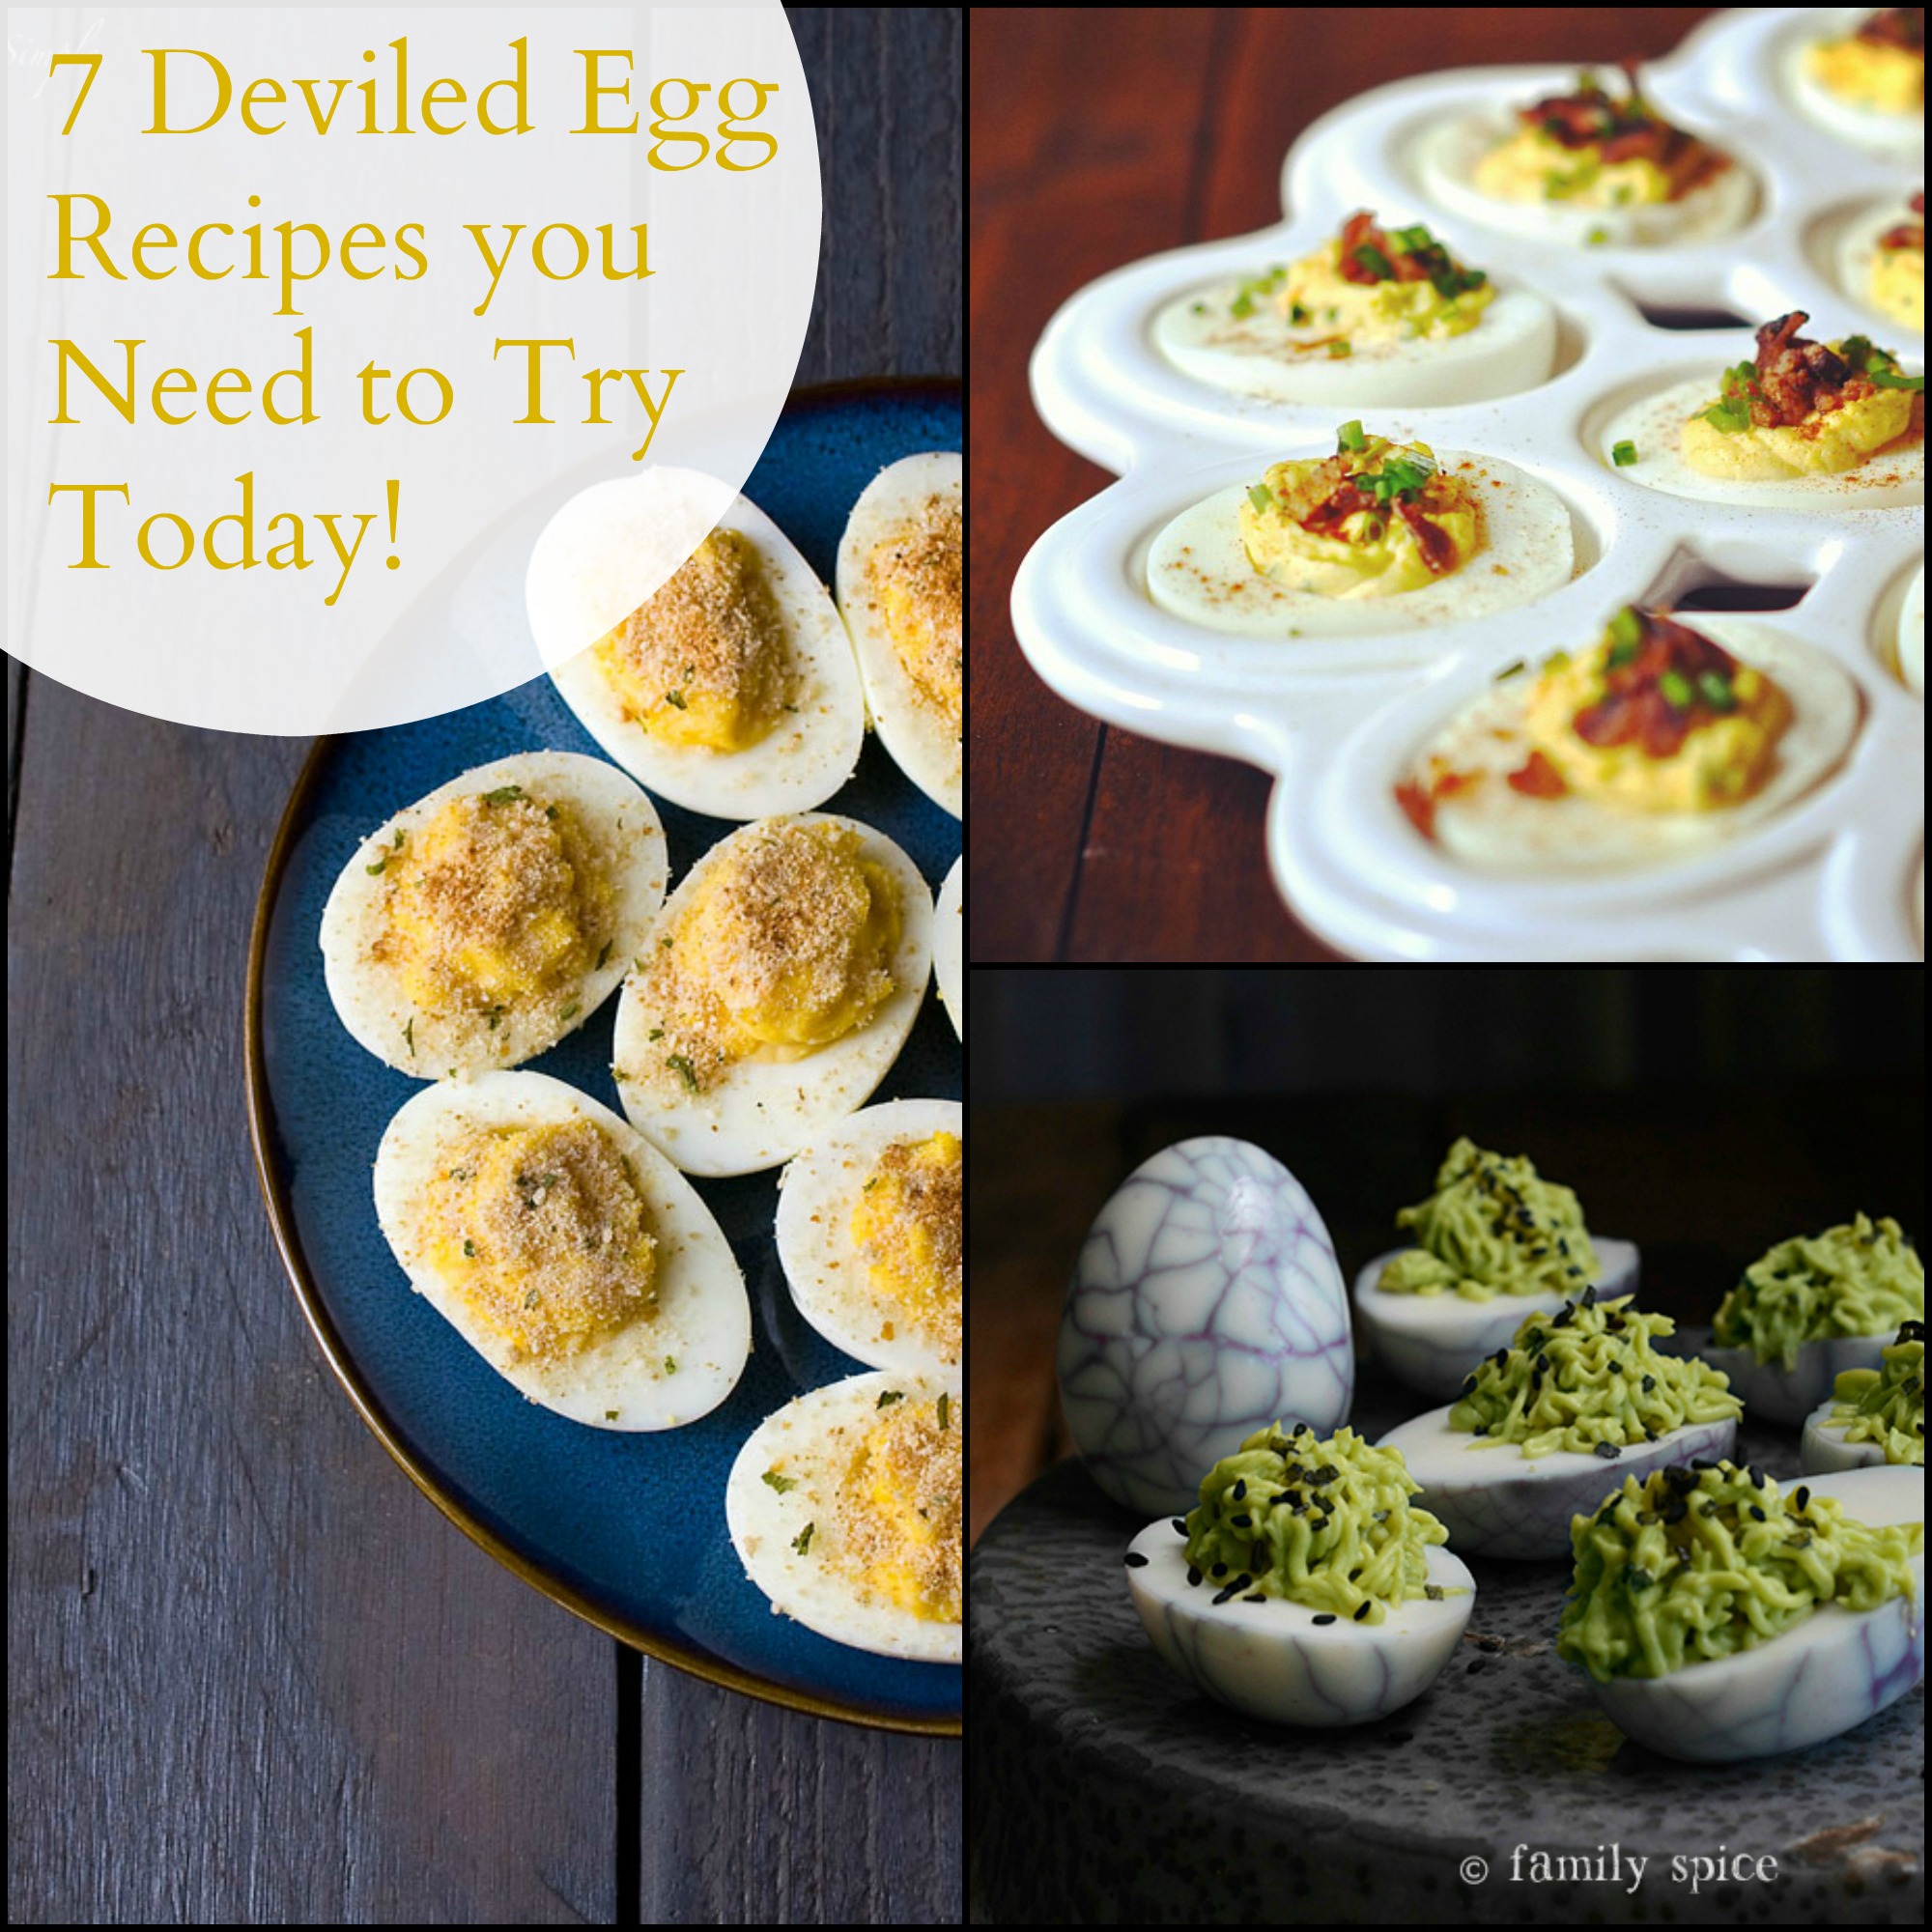 7 Deviled Egg Recipes you Need to Try Today!